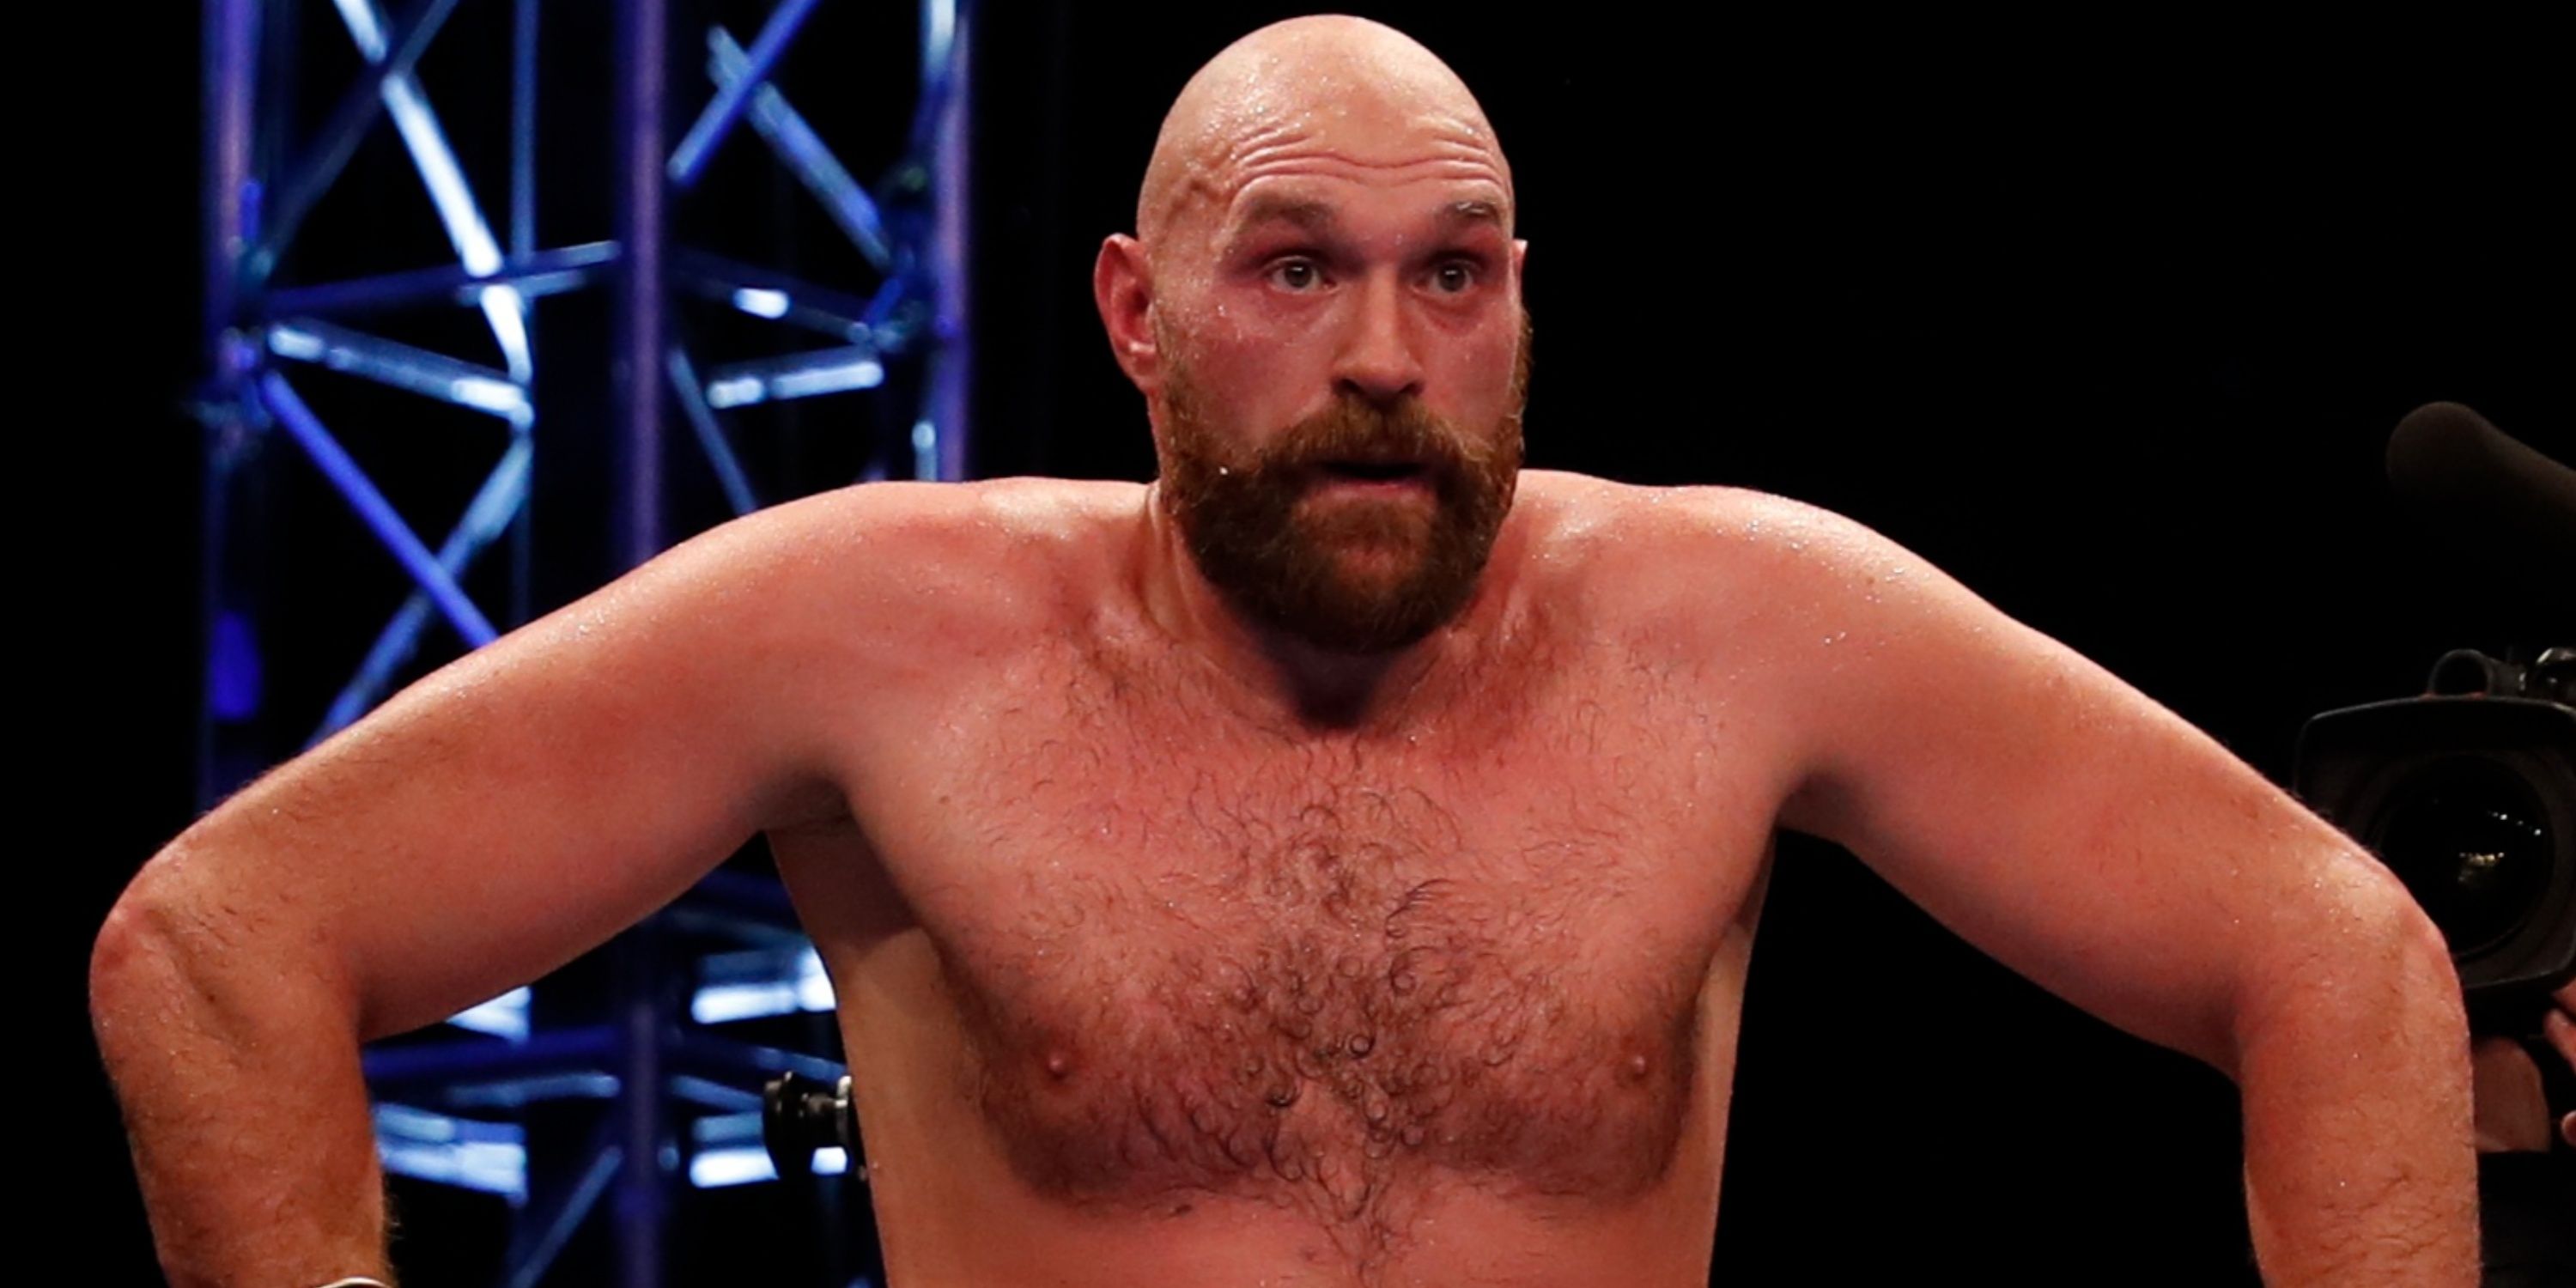 Tyson Fury in the ring